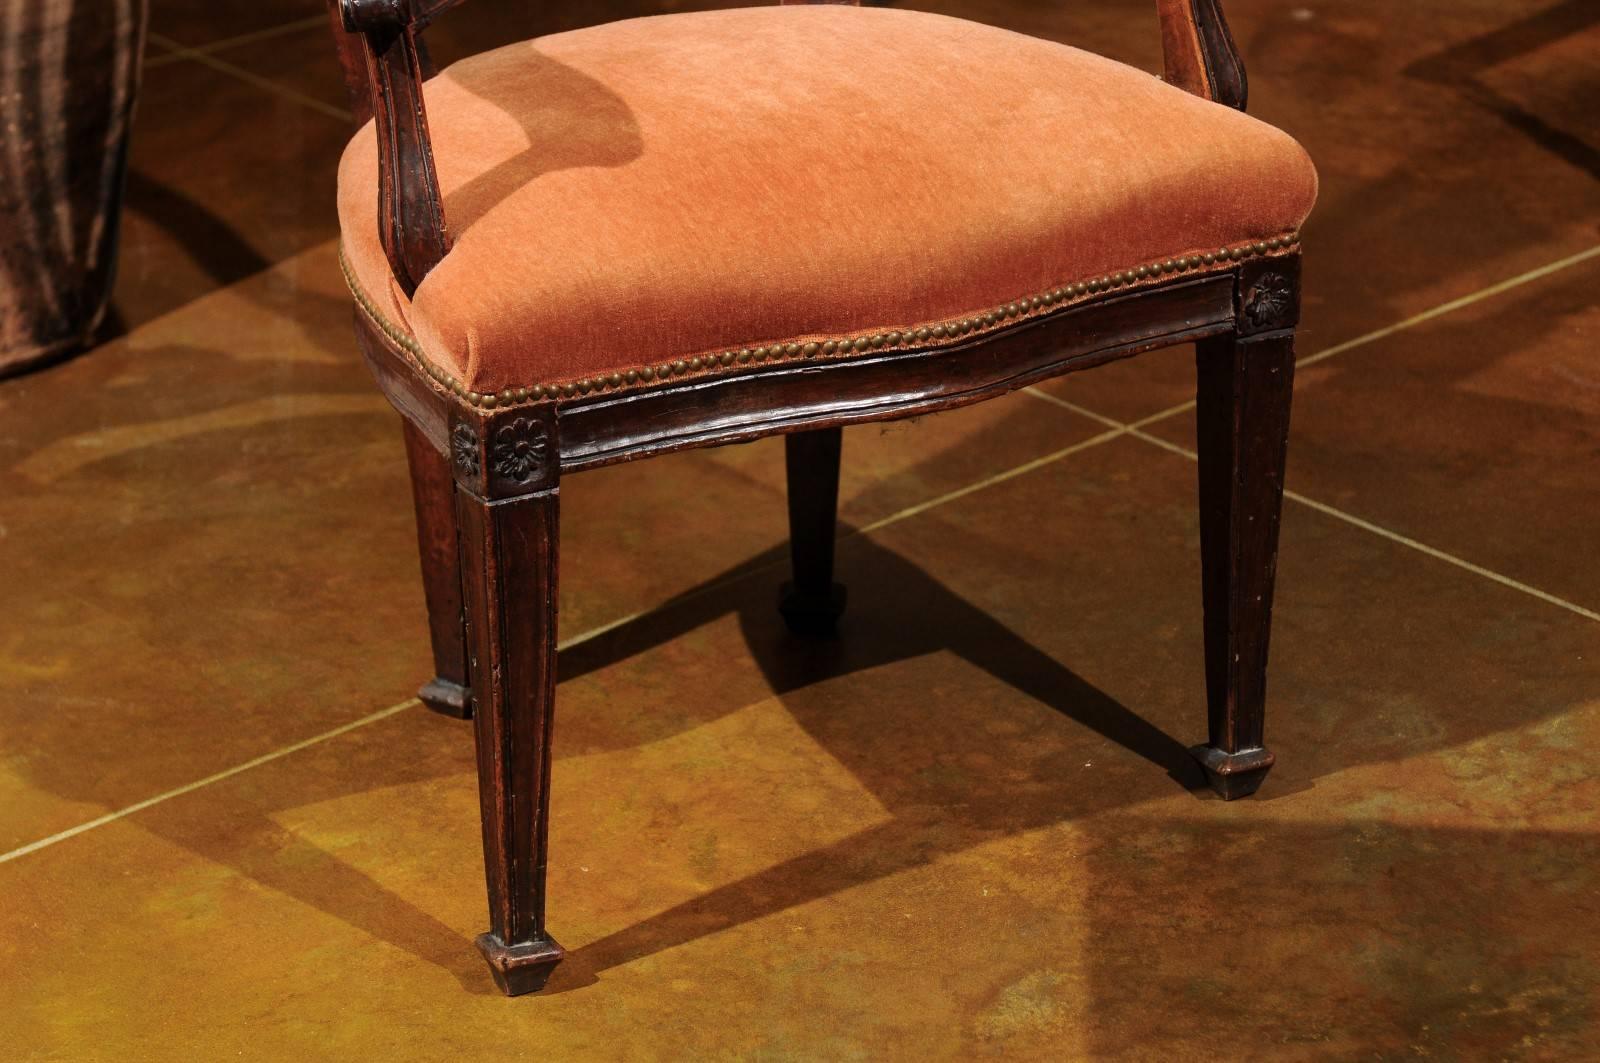 Transitional Rococo / Neoclassical Armchair in Walnut, Italy, circa 1780 For Sale 3